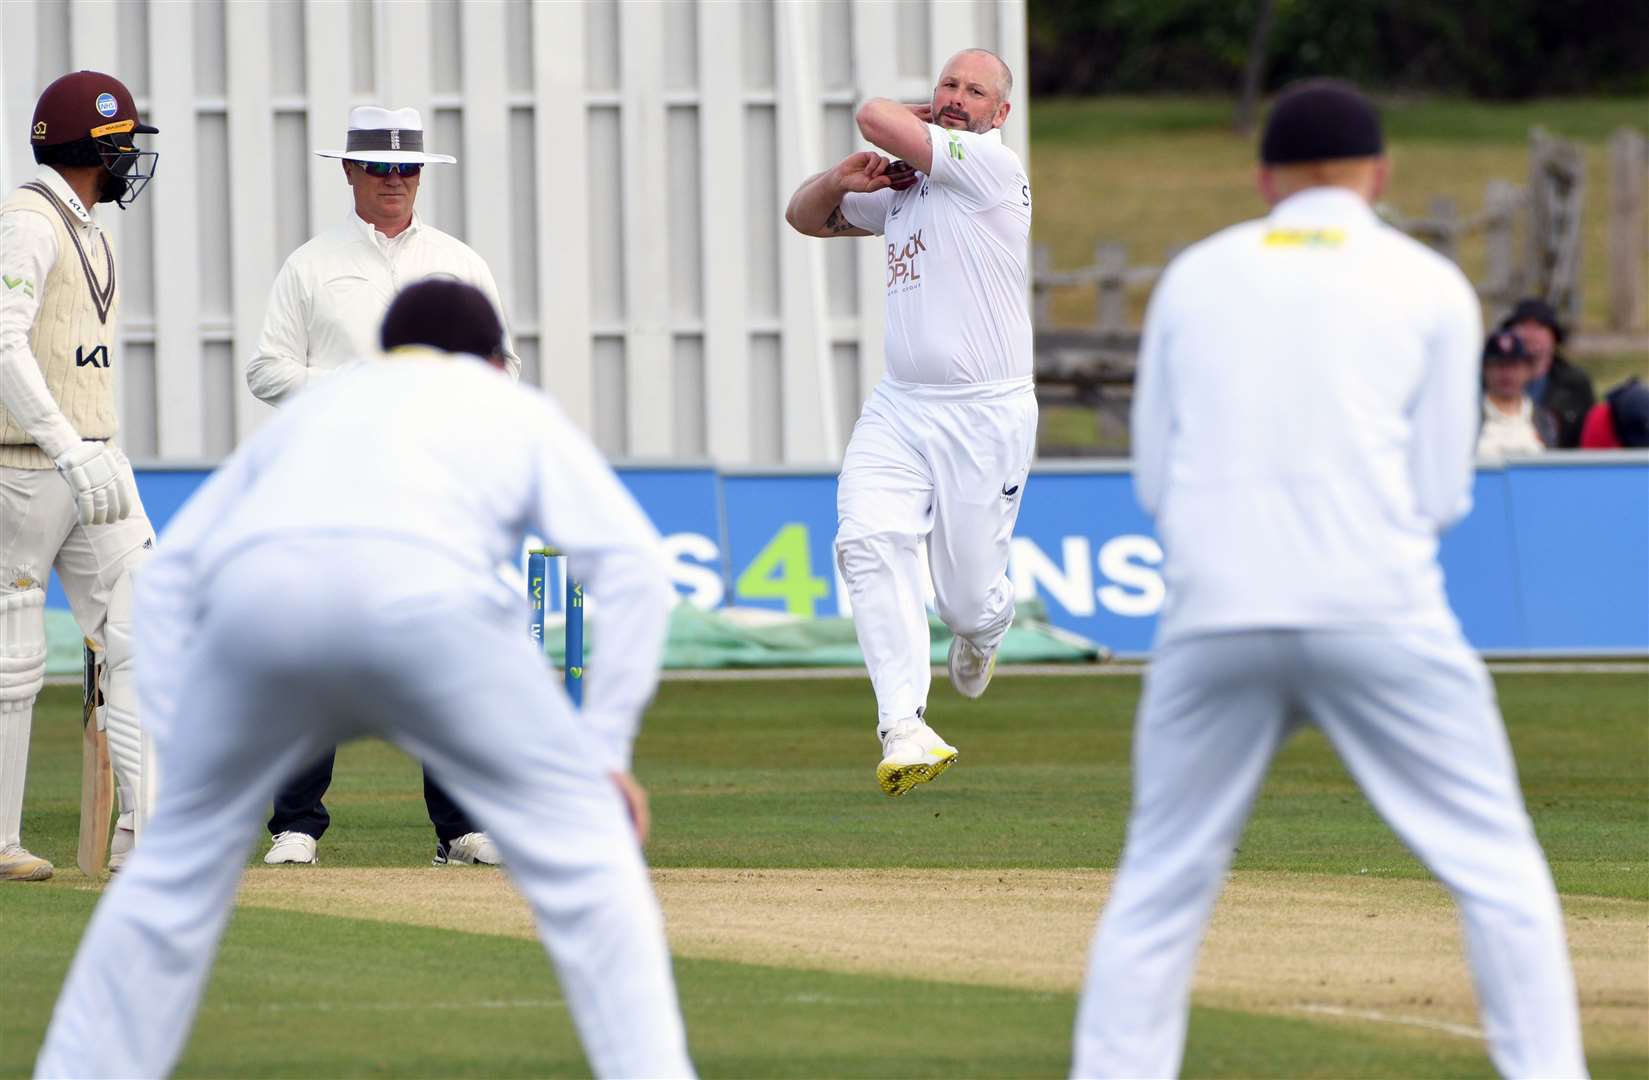 Darren Stevens took the wicket of Ollie Pope with the Surrey batsman just four runs short of a century. Picture: Barry Goodwin